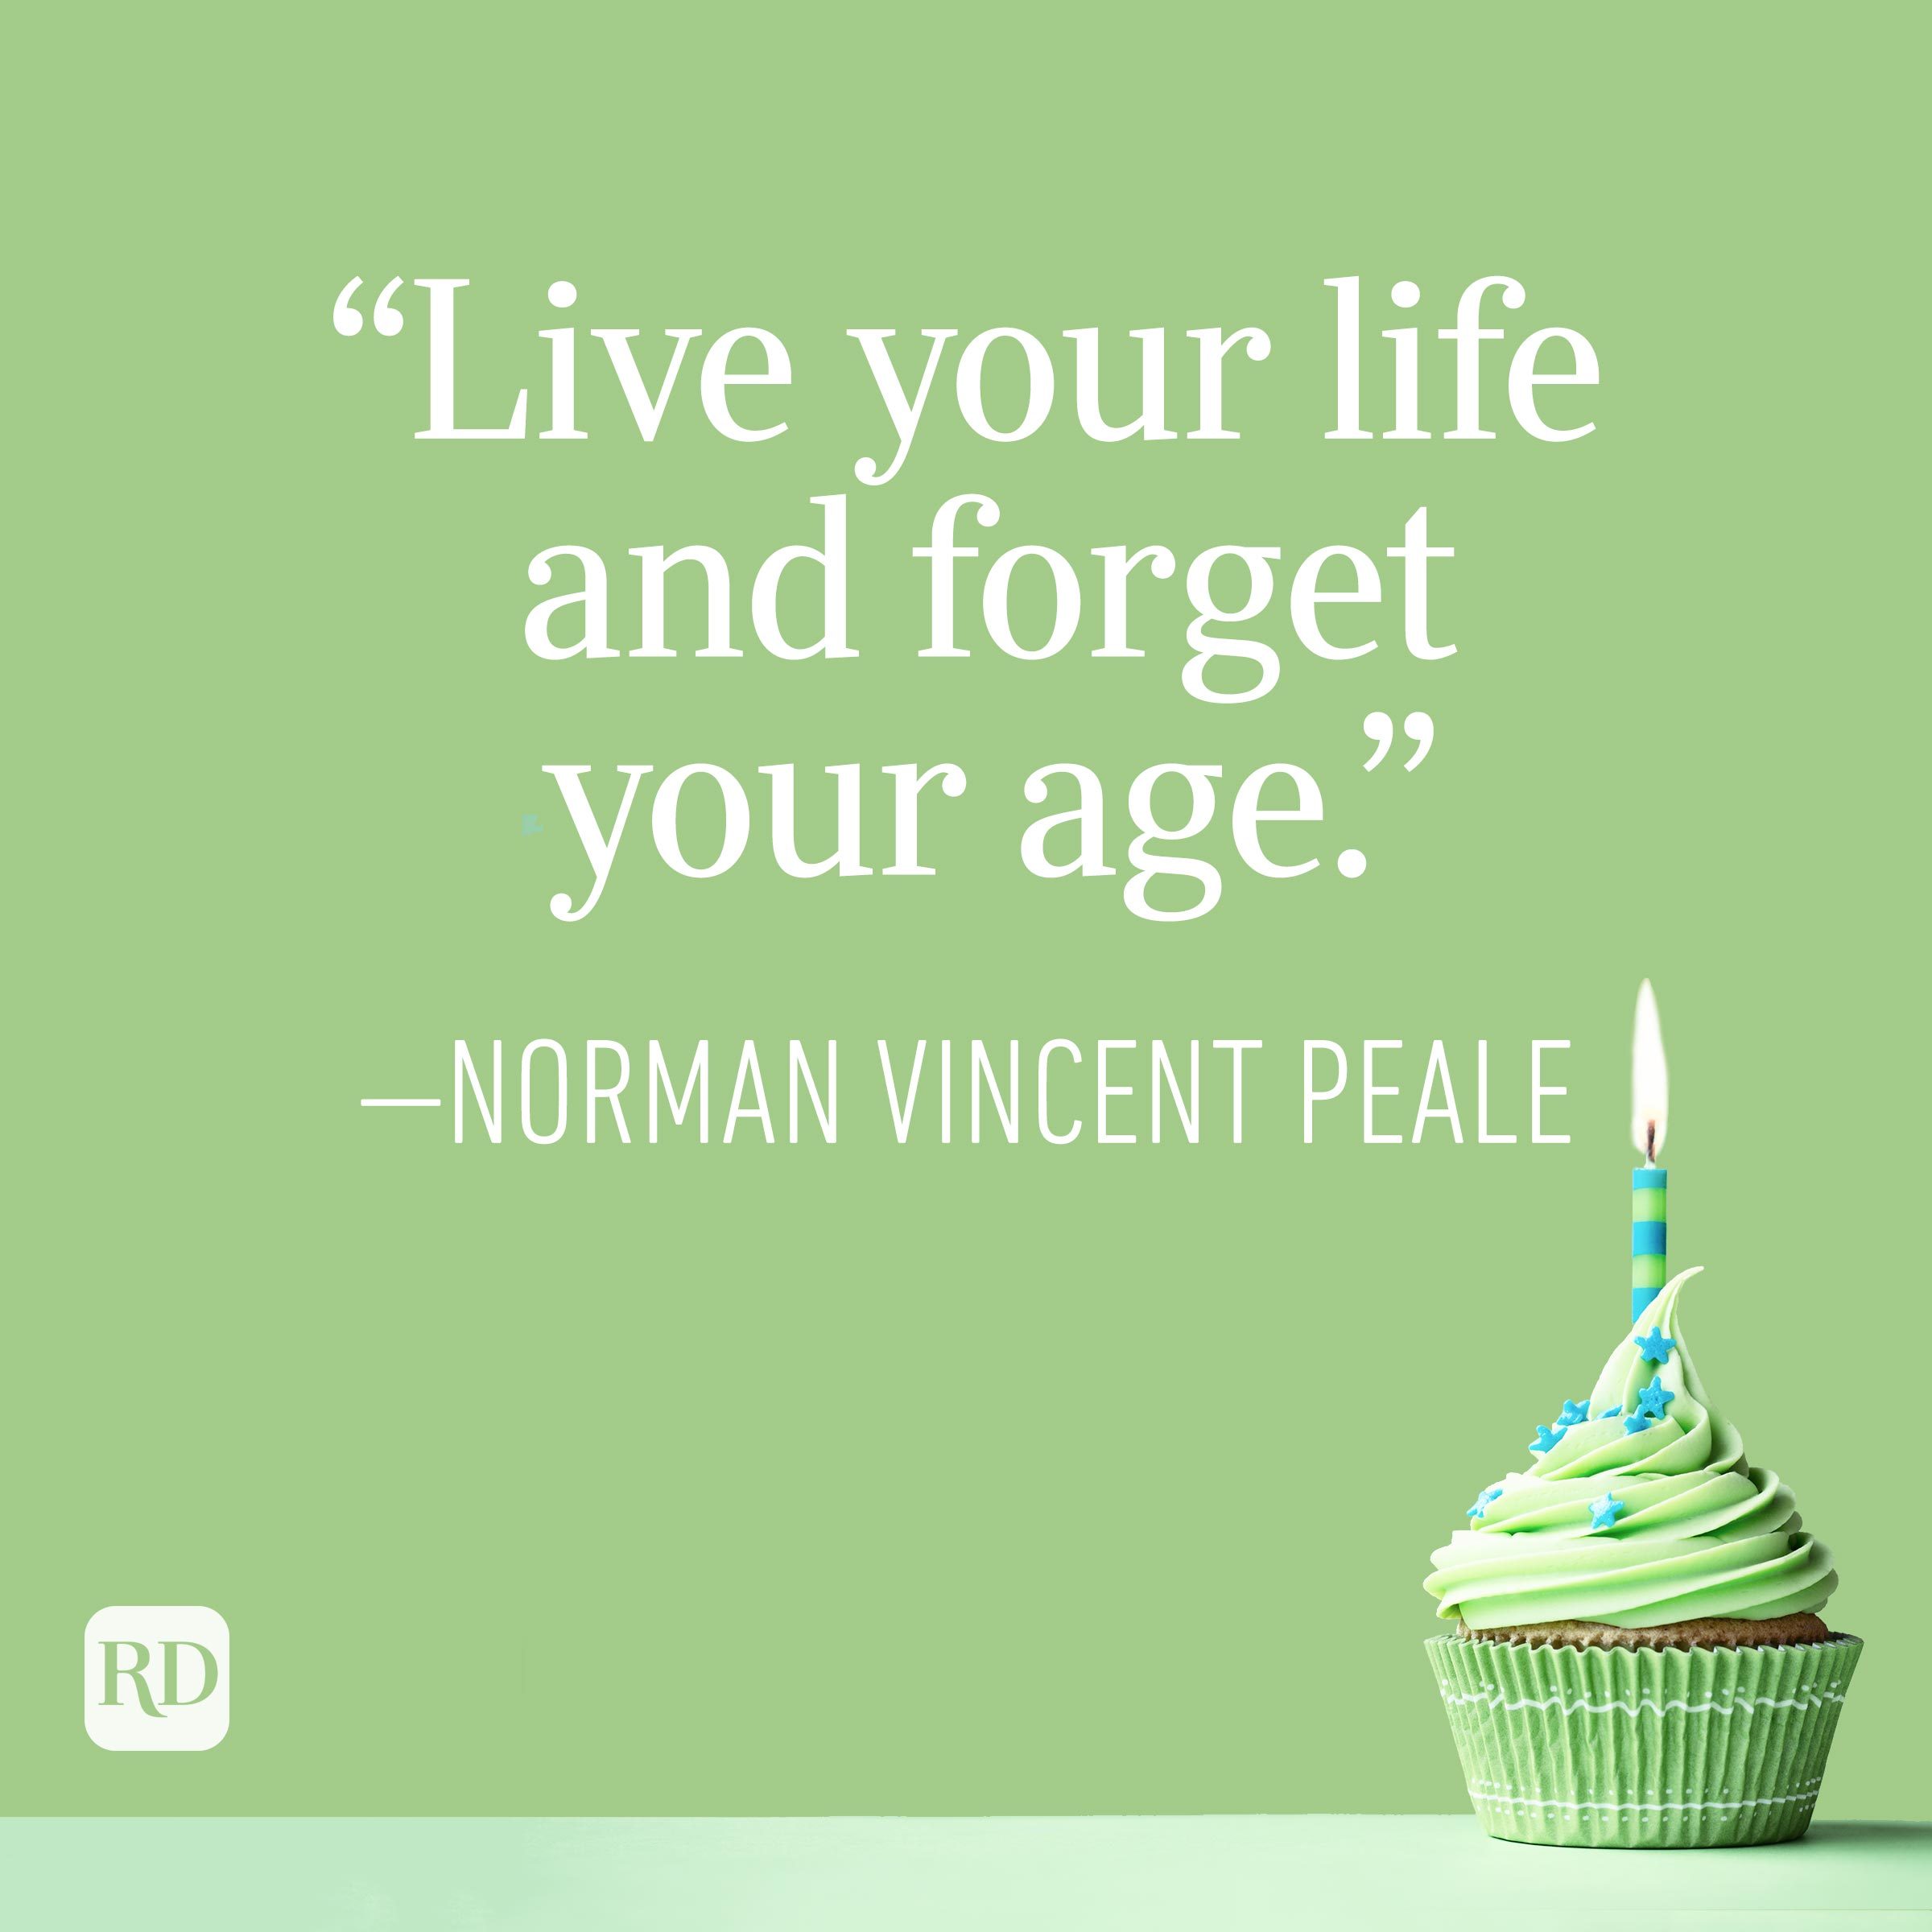 "Live your life and forget your age." —Norman Vincent Peale